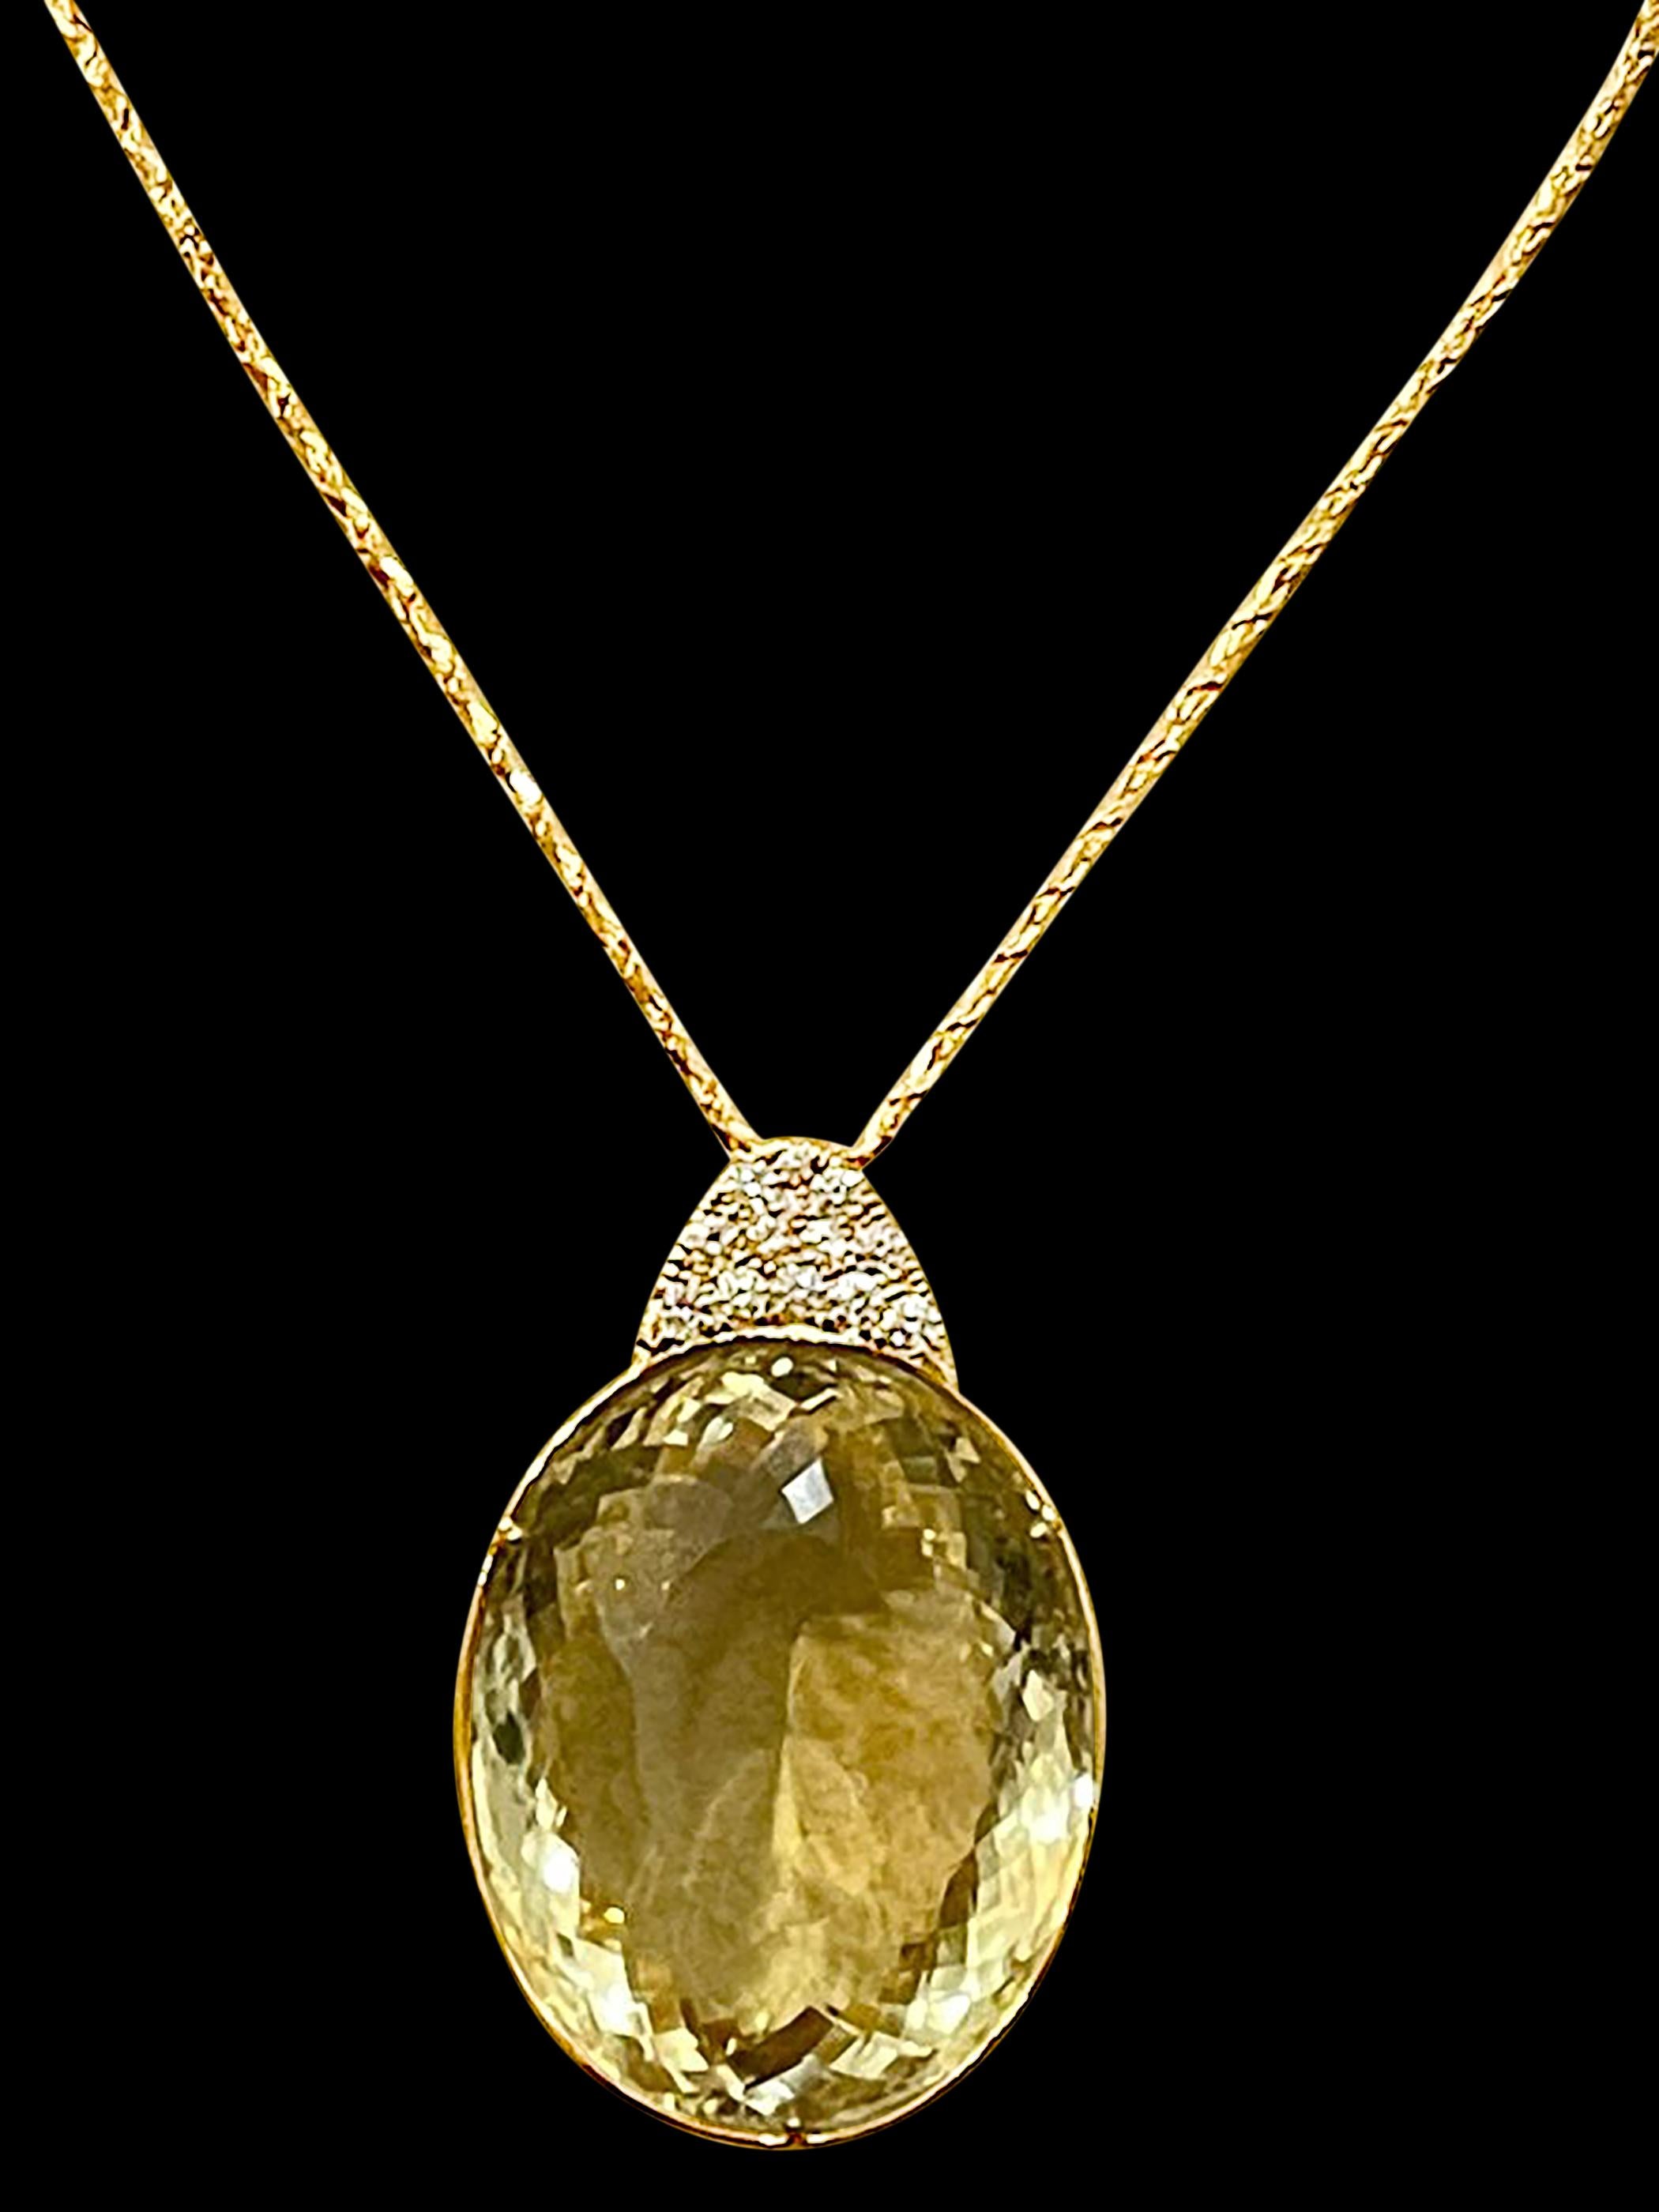 Approximately 125 + Carat   Citrine  and approximately 1.0 Ct Diamond Pendent/Necklace 14 Karat  Yellow Gold with Chain
This Huge Oval shape citrine pendant necklace is a eye-catching pendant necklace . It features a large  fine  125  ct  Oval shape